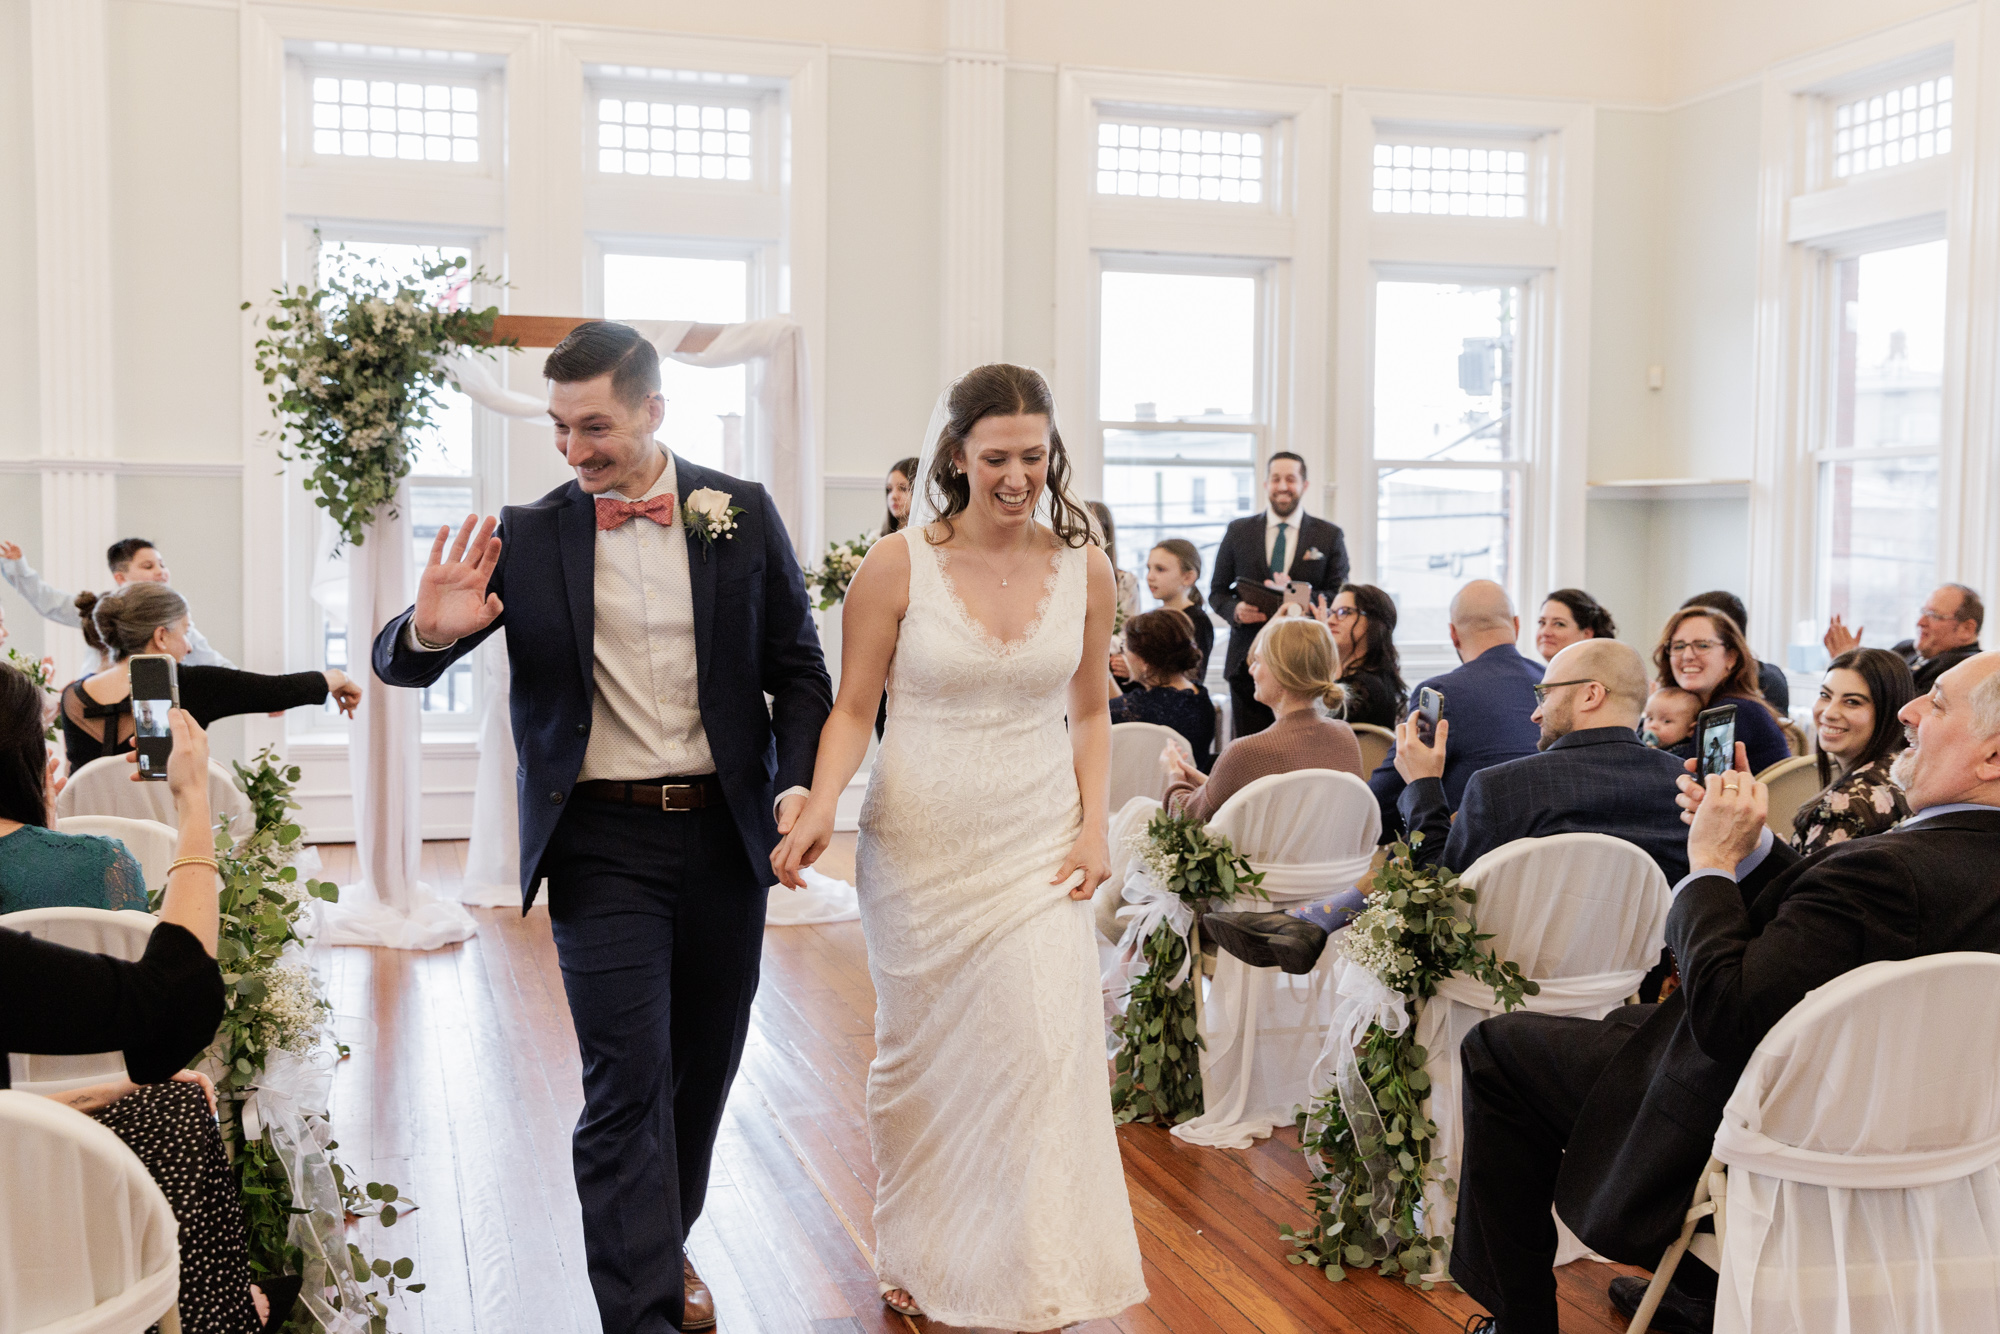 Elegant groom waves to guests as he and bride walk down the aisle after their ceremony at historic Old City Hall in Bordentown, NJ